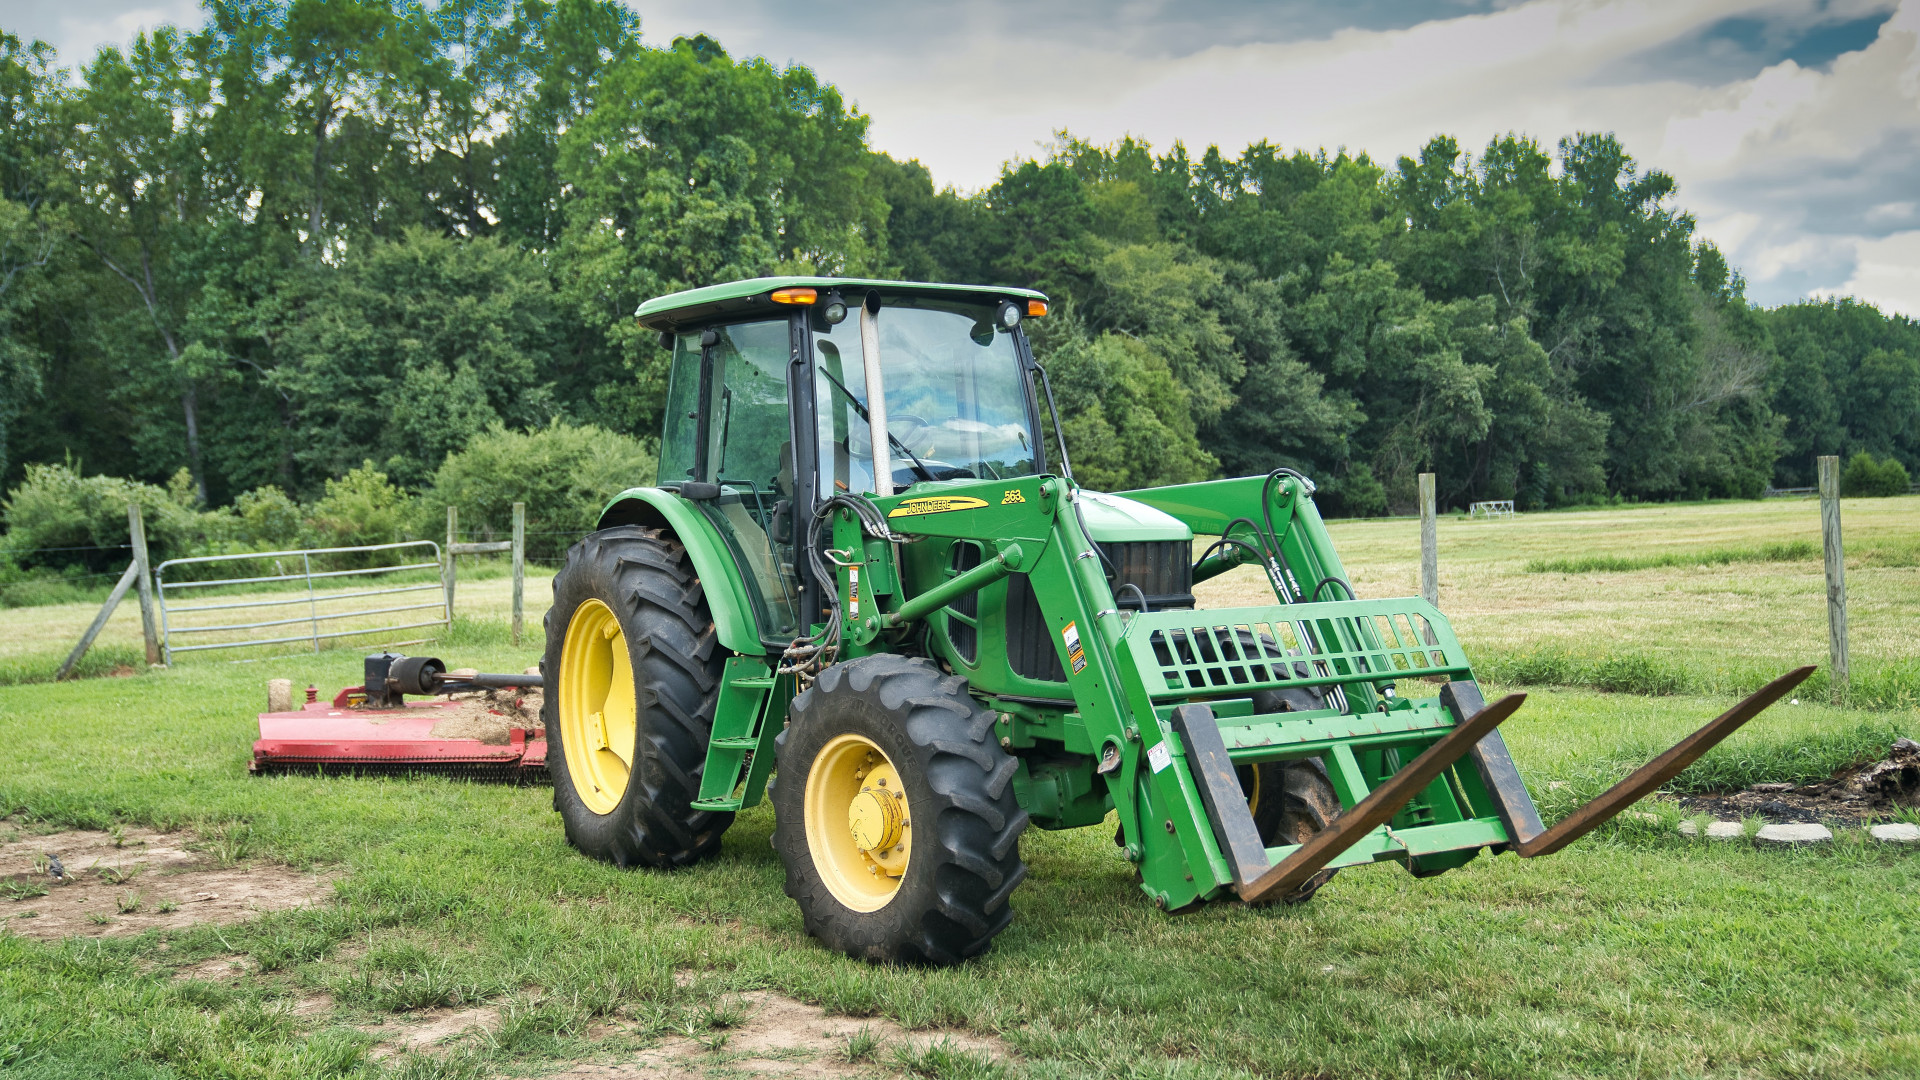 An offer of adapted services for agricultural machinery